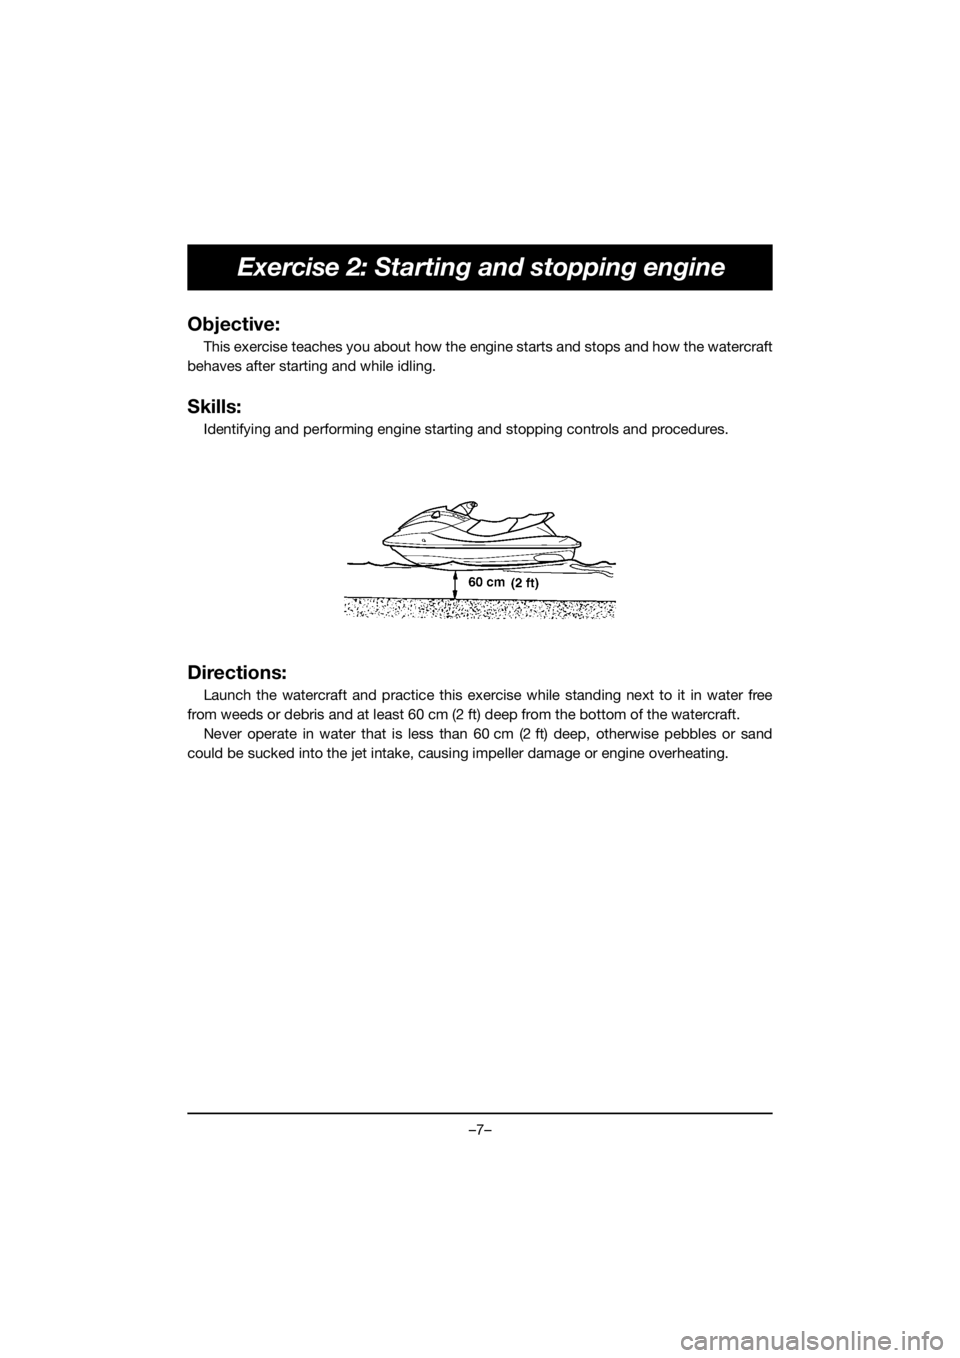 YAMAHA EX 2019  Notices Demploi (in French) –7–
Exercise 2: Starting and stopping engine
Objective:
This exercise teaches you about how the engine starts and stops and how the watercraft
behaves after starting and while idling.
Skills:
Iden